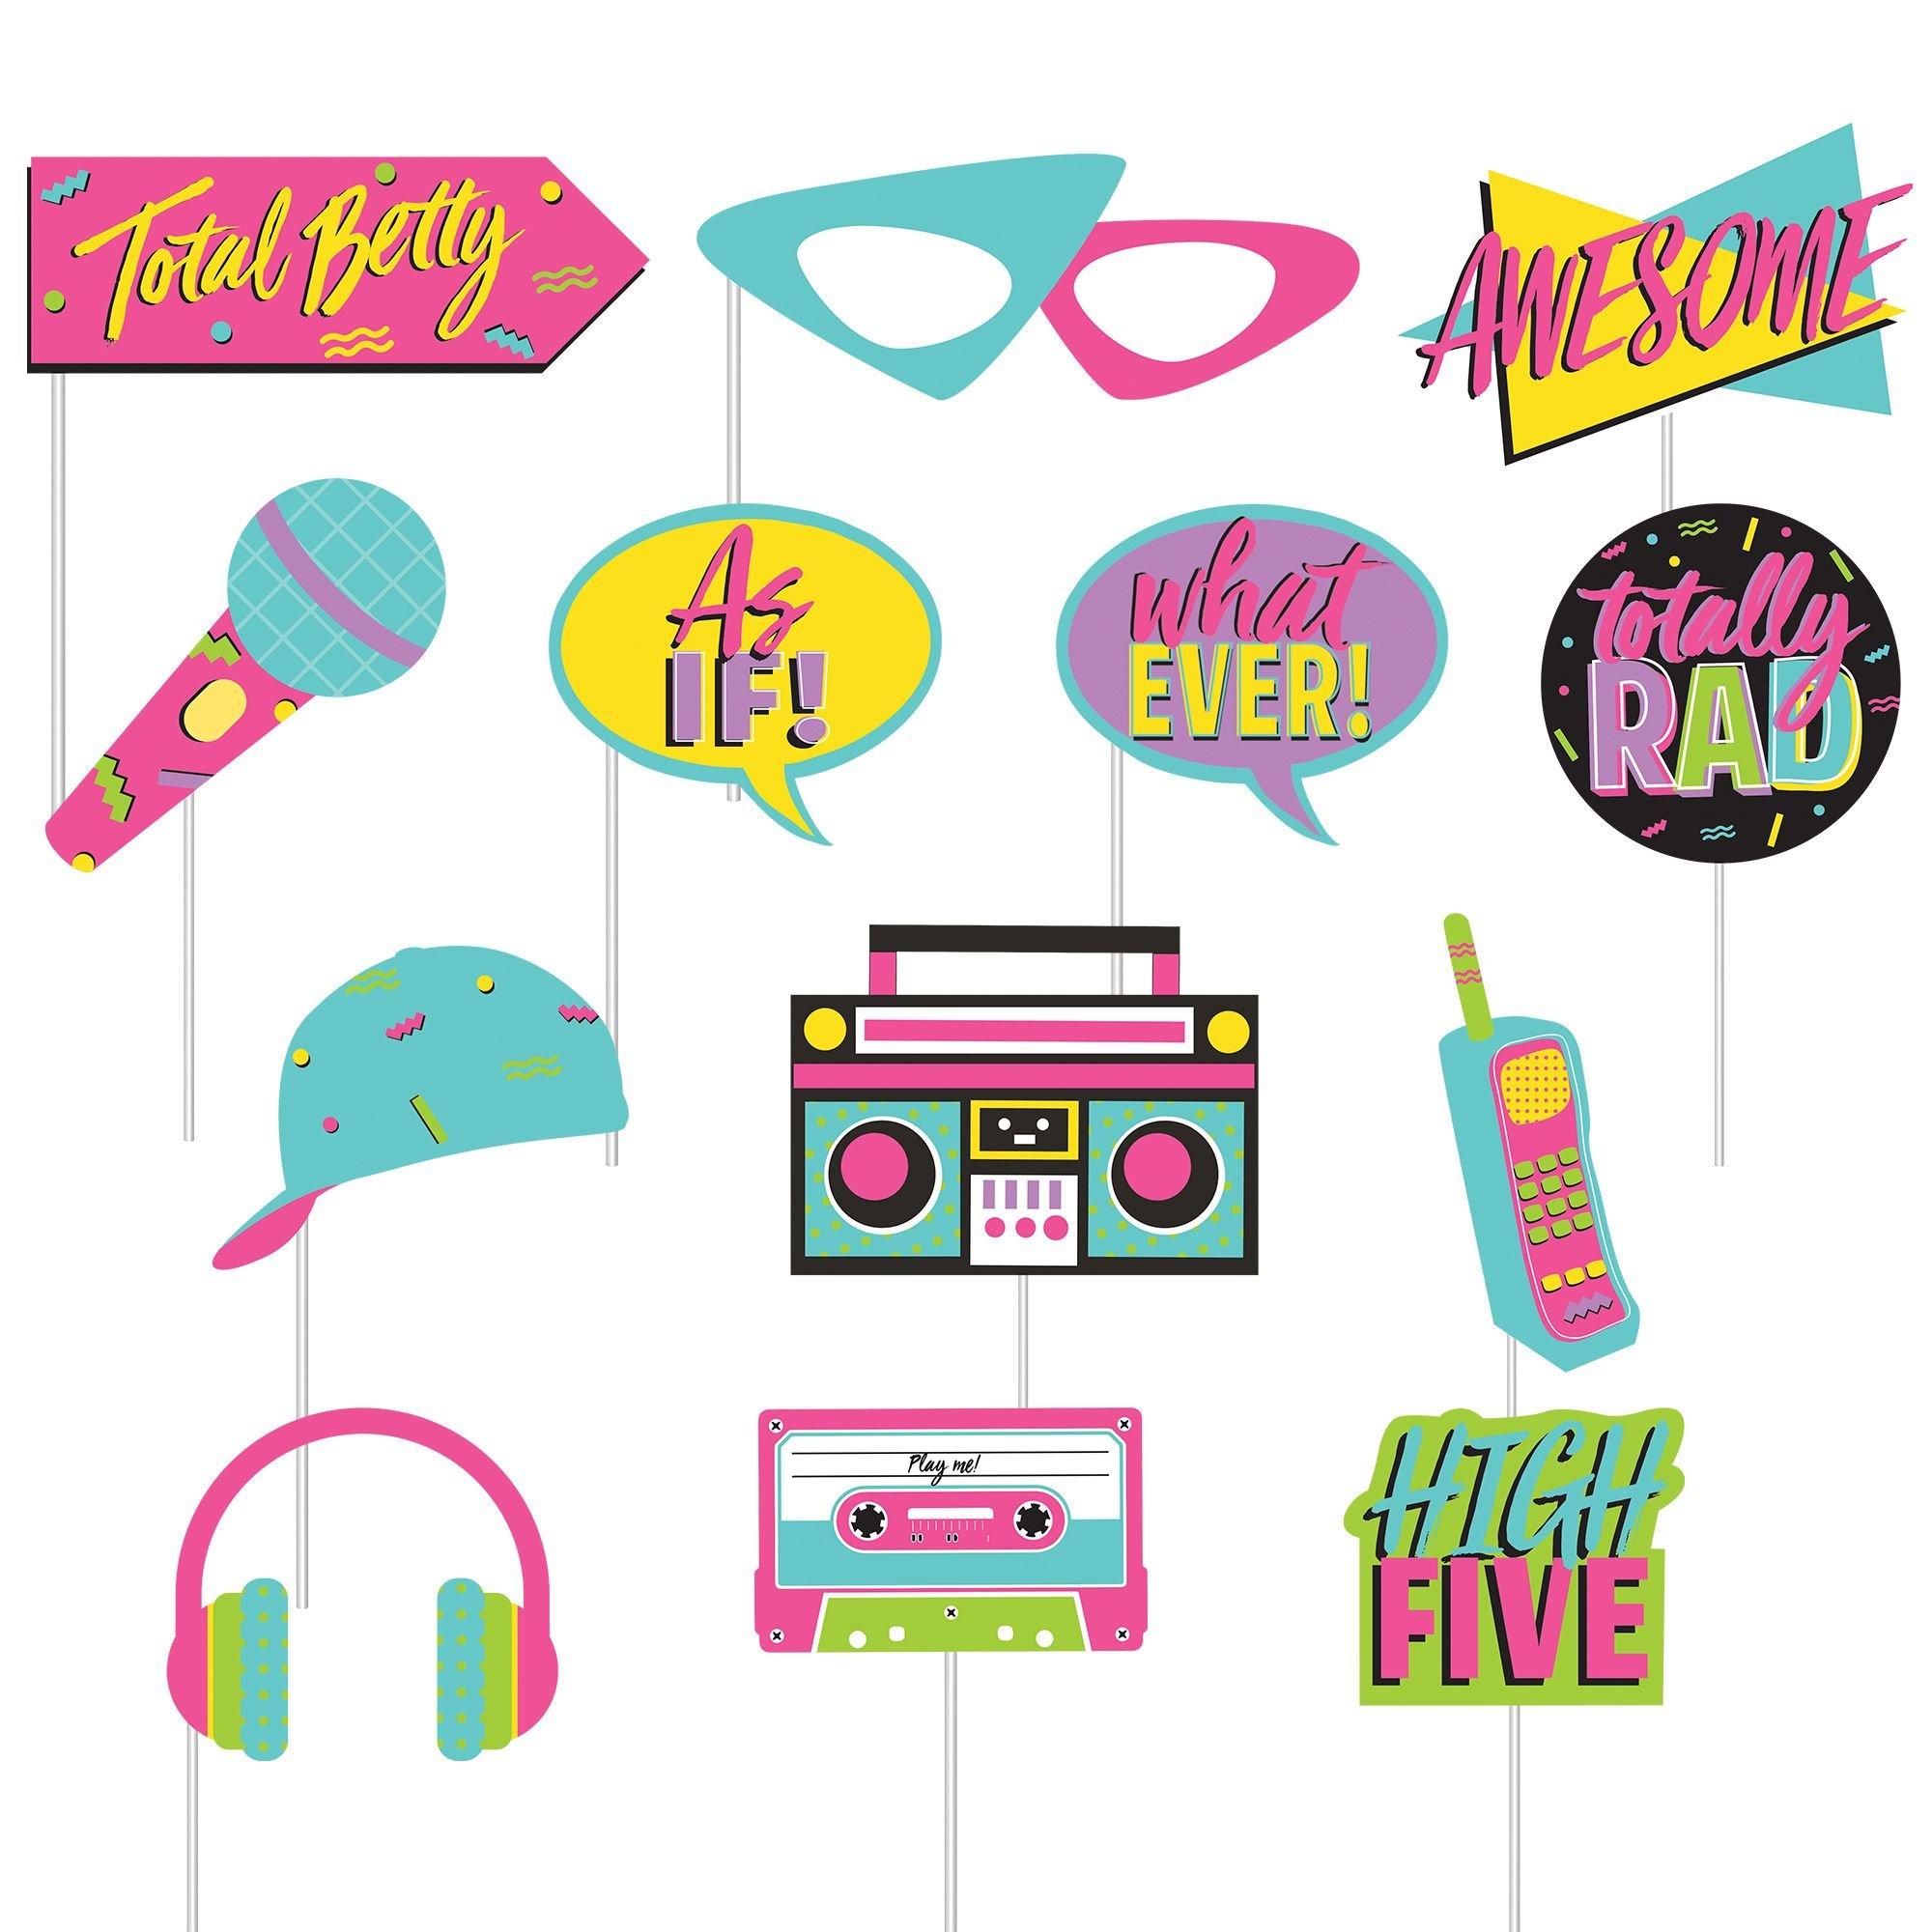 Awesome 80s Scene Setter with Photo Booth Props | Party City